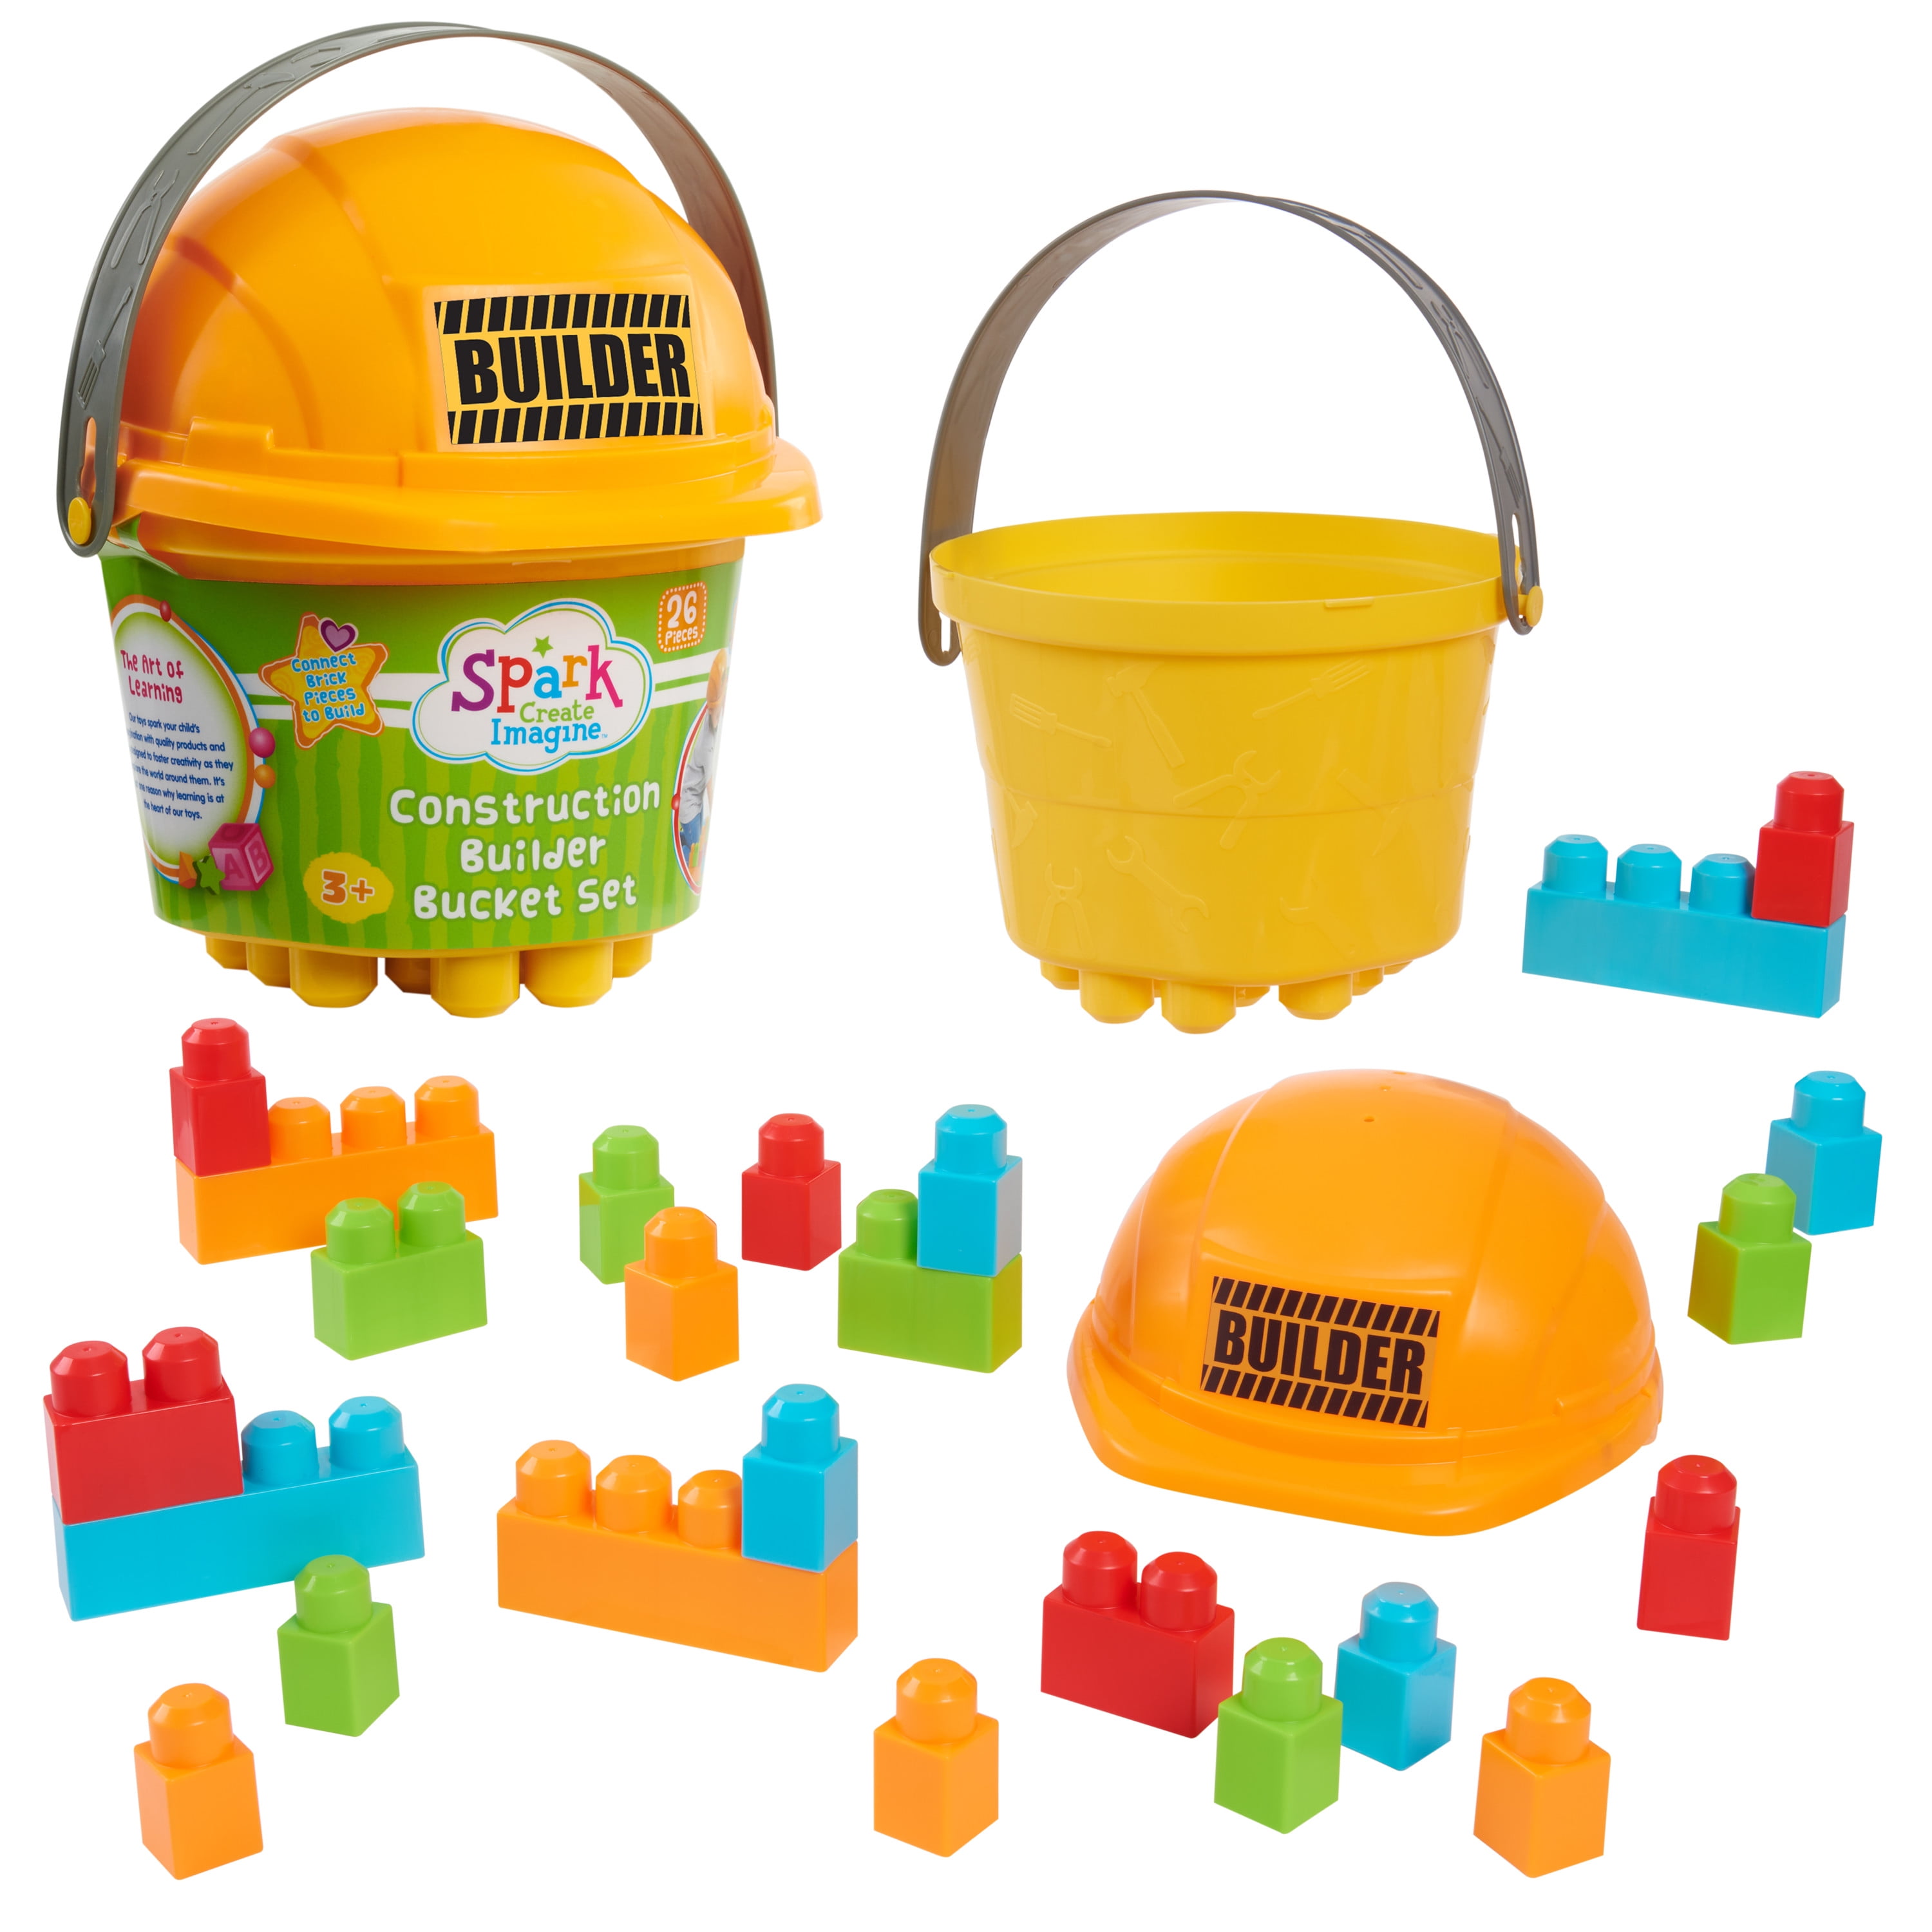 Spark Create Imagine Construction Builder Bucket,  Kids Toys for Ages 3 Up, Gifts and Presents